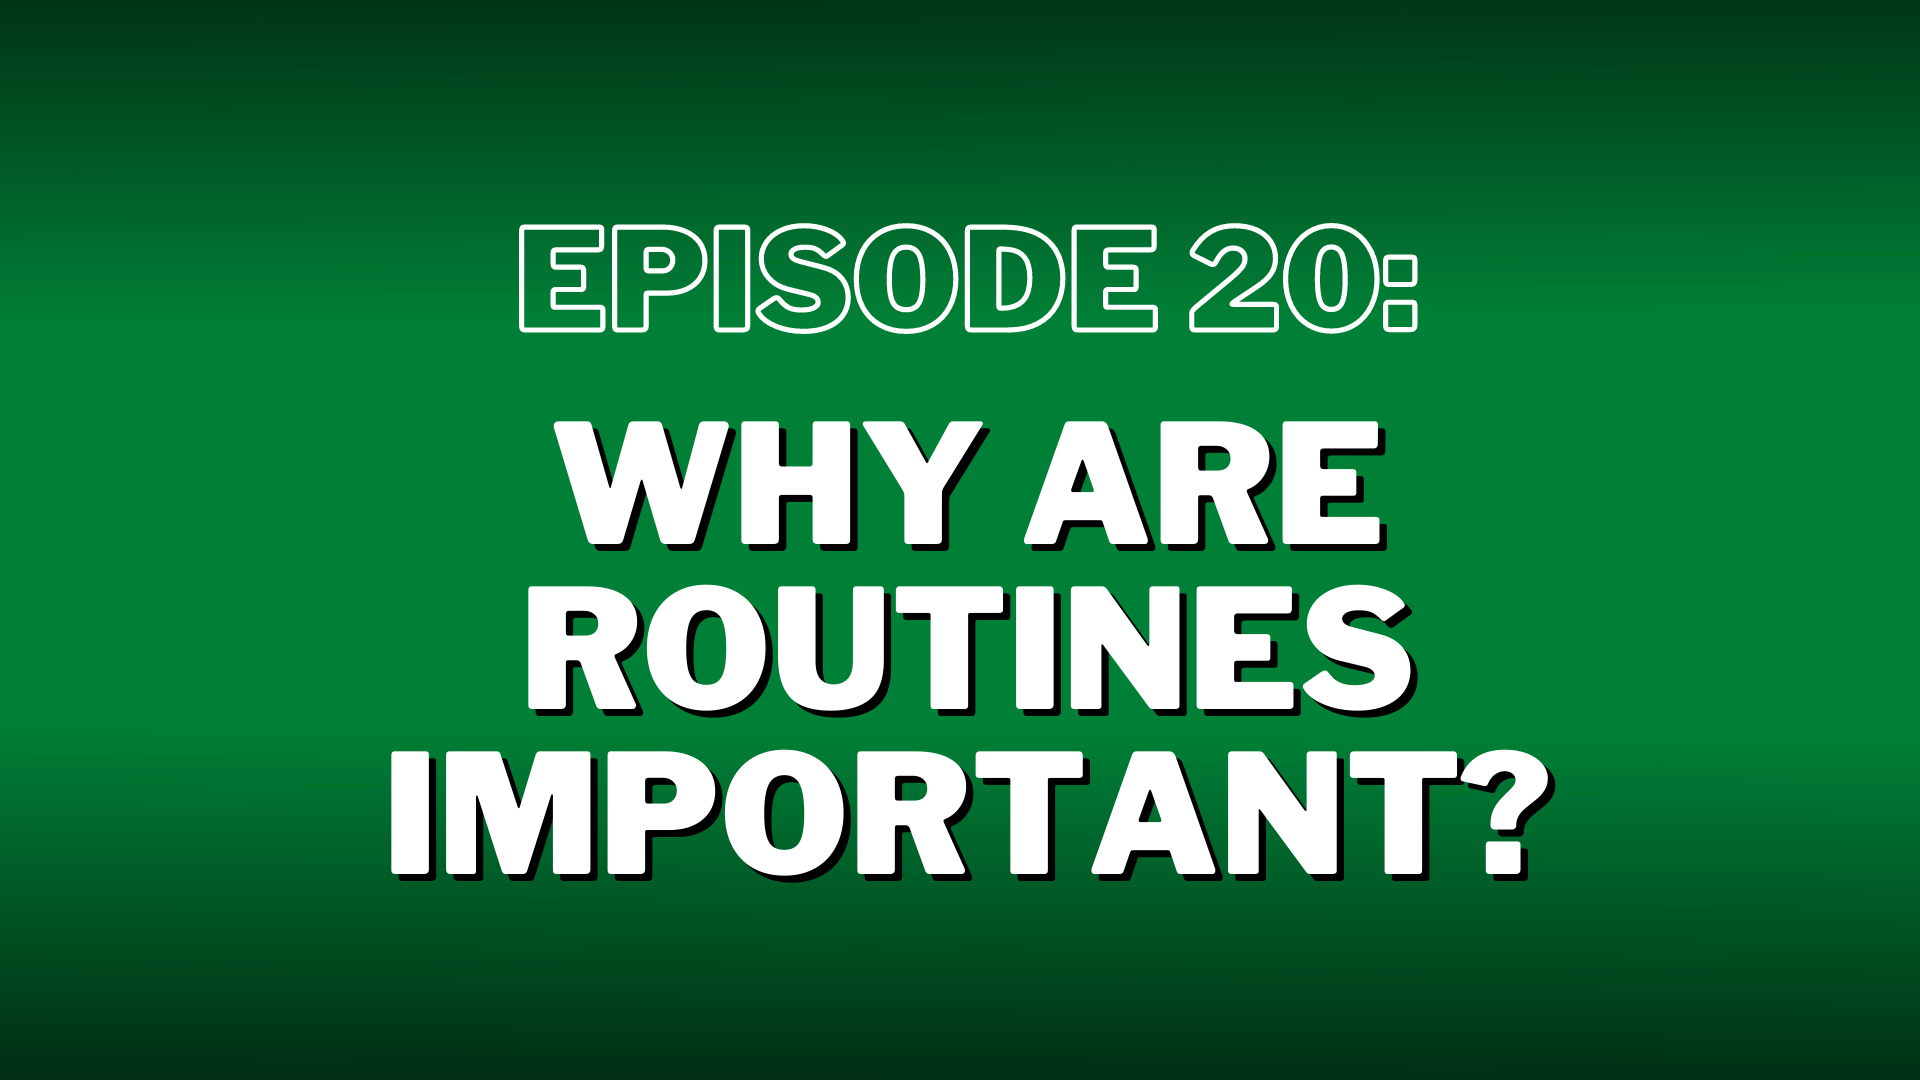 Episode 20. “Why Are Routines Important?” – Show Notes